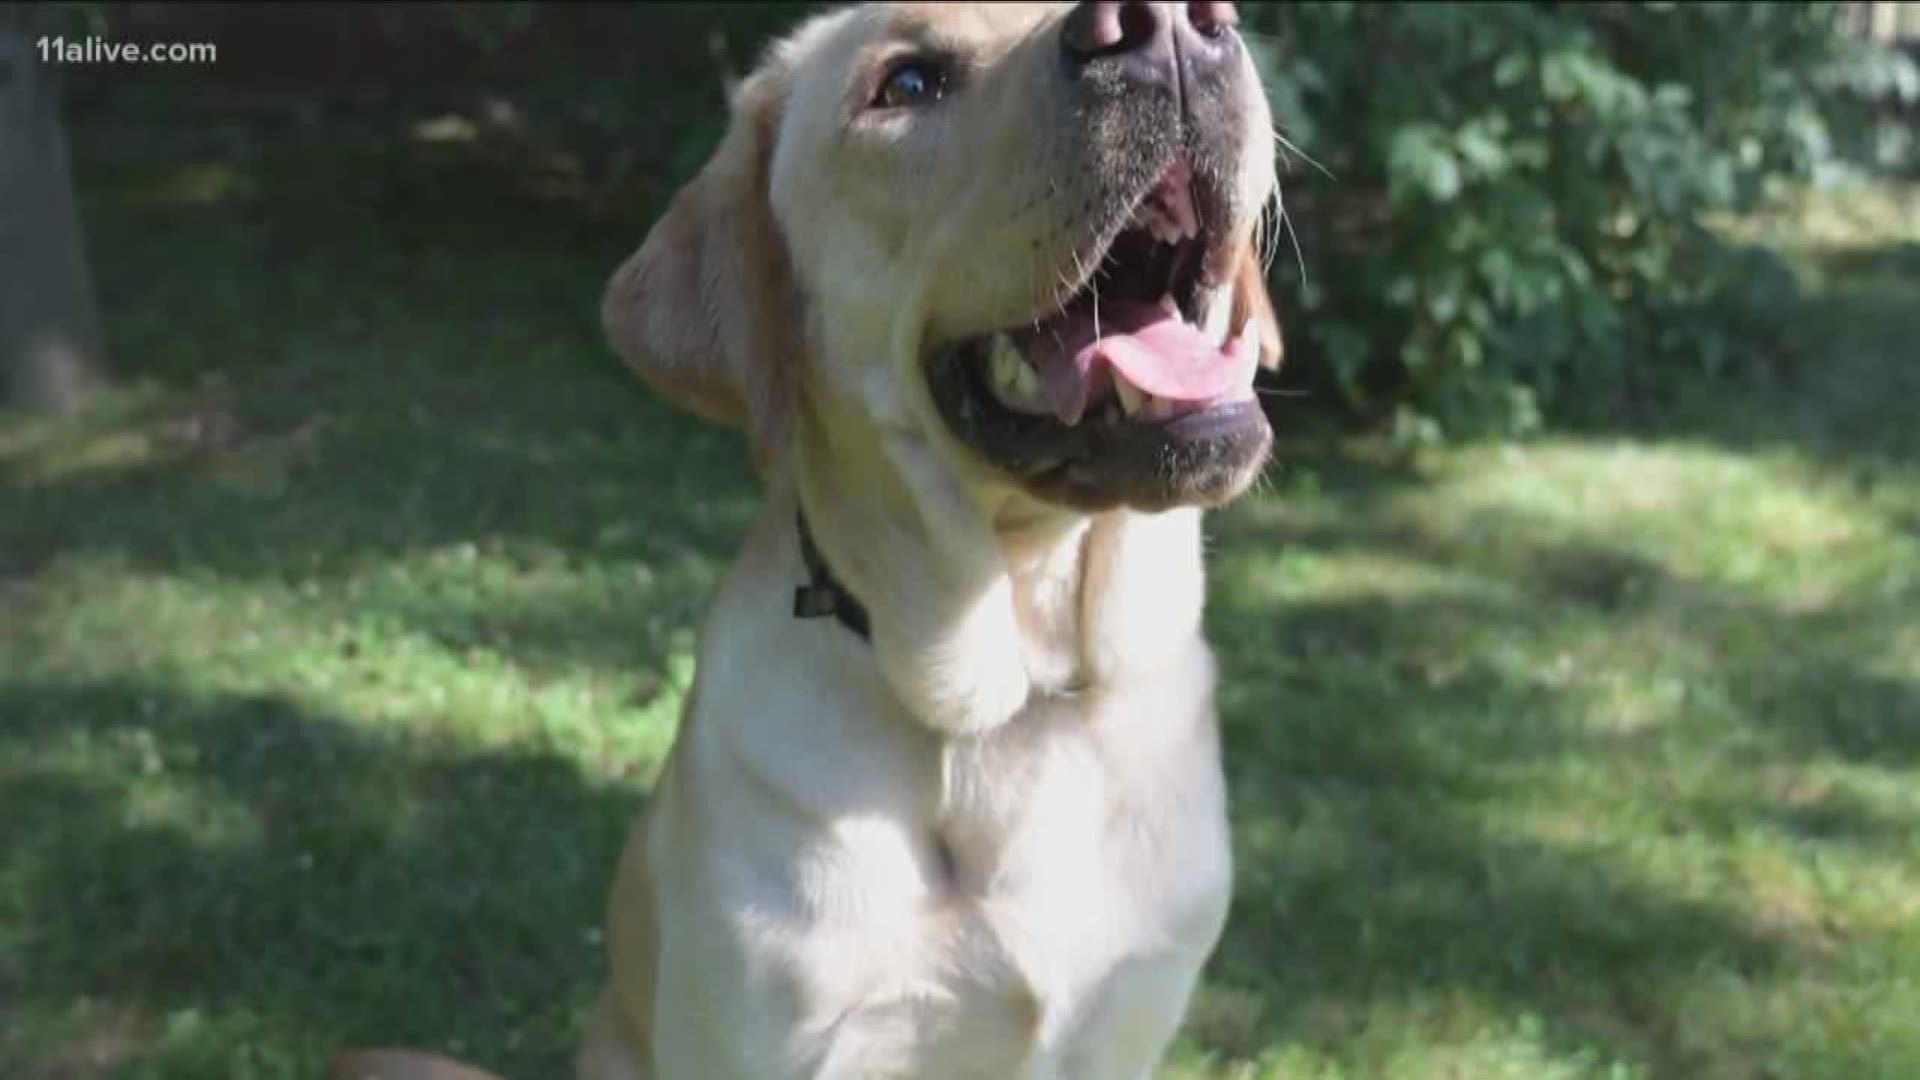 Izzy spent a year growing and training and will eventually become a guide dog.